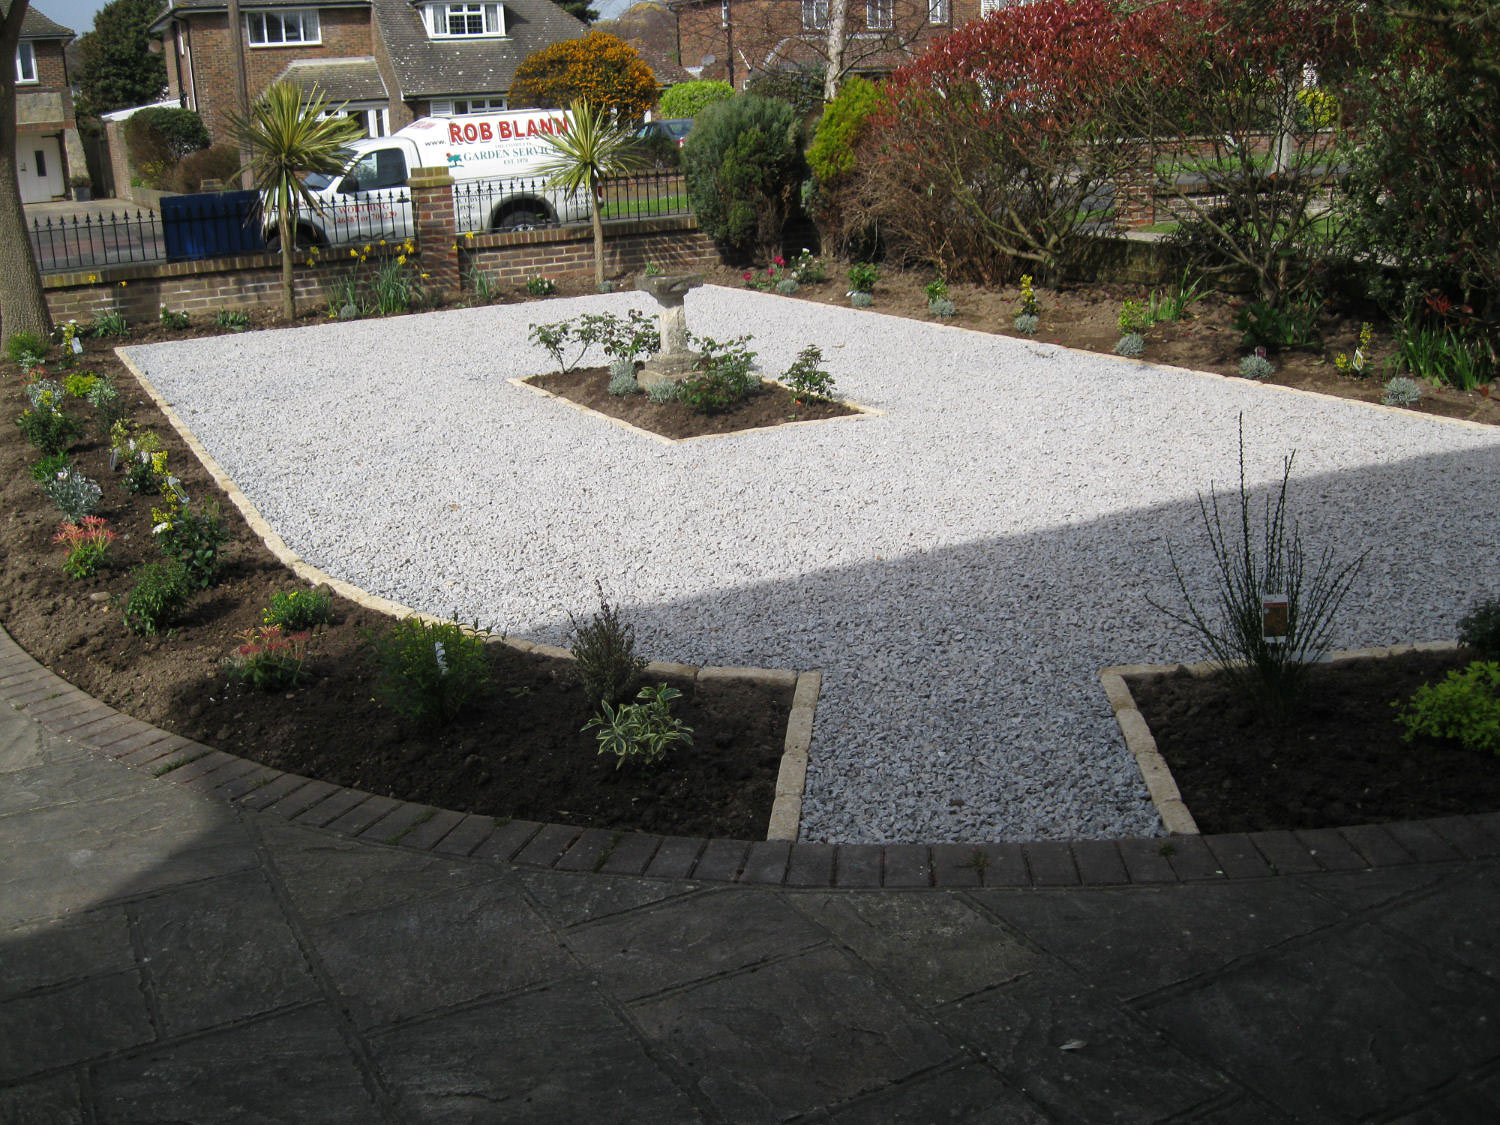 Landscaped front garden with stone chippings and new planting